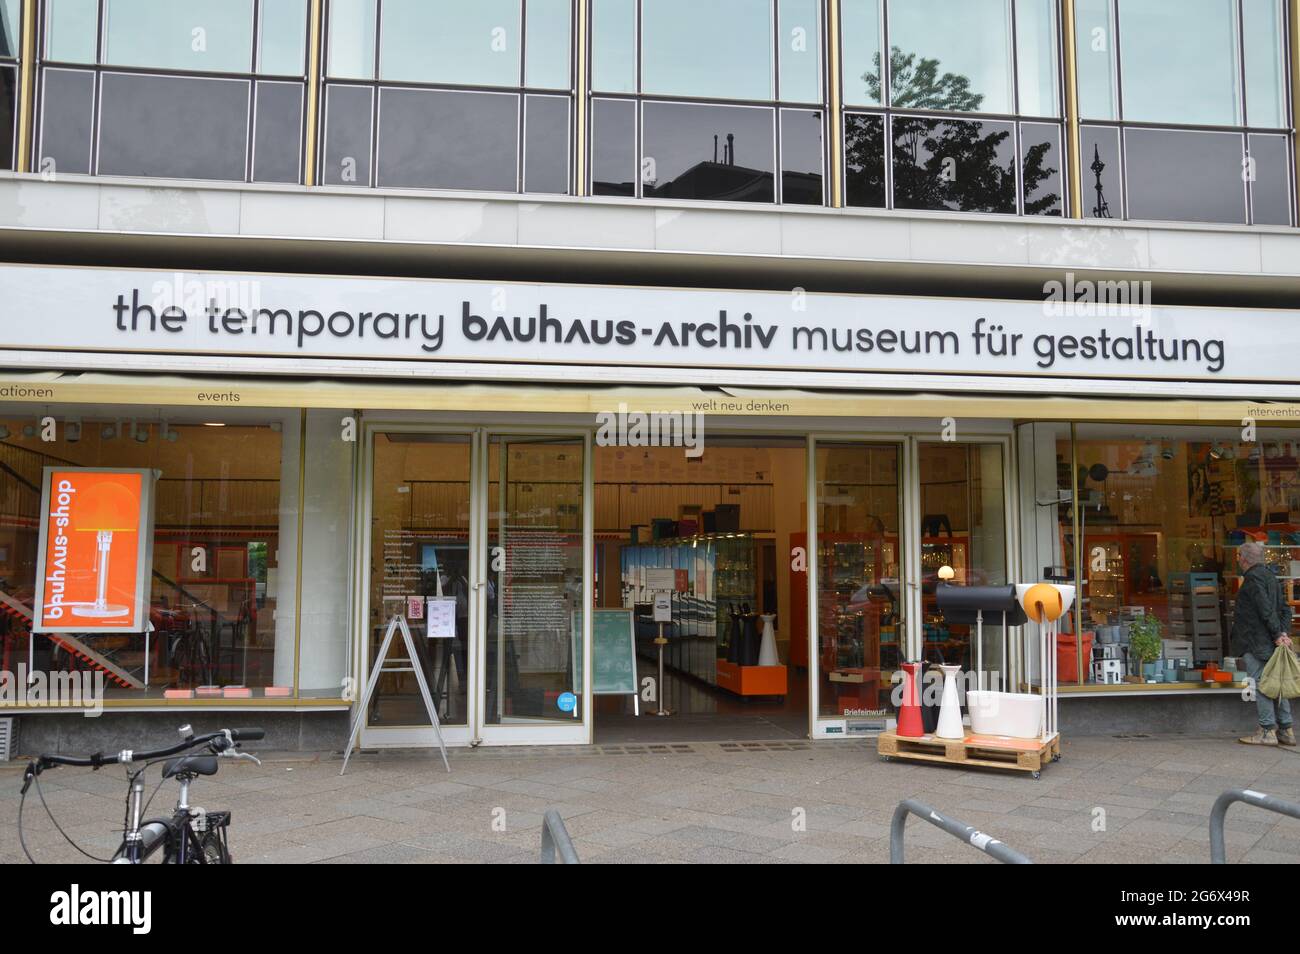 The entrance of the temporary bauhaus-archiv museum für gestaltung at Knesebeckstrasse in Charlottenburg, Berlin, Germany - July 8, 2021. Stock Photo